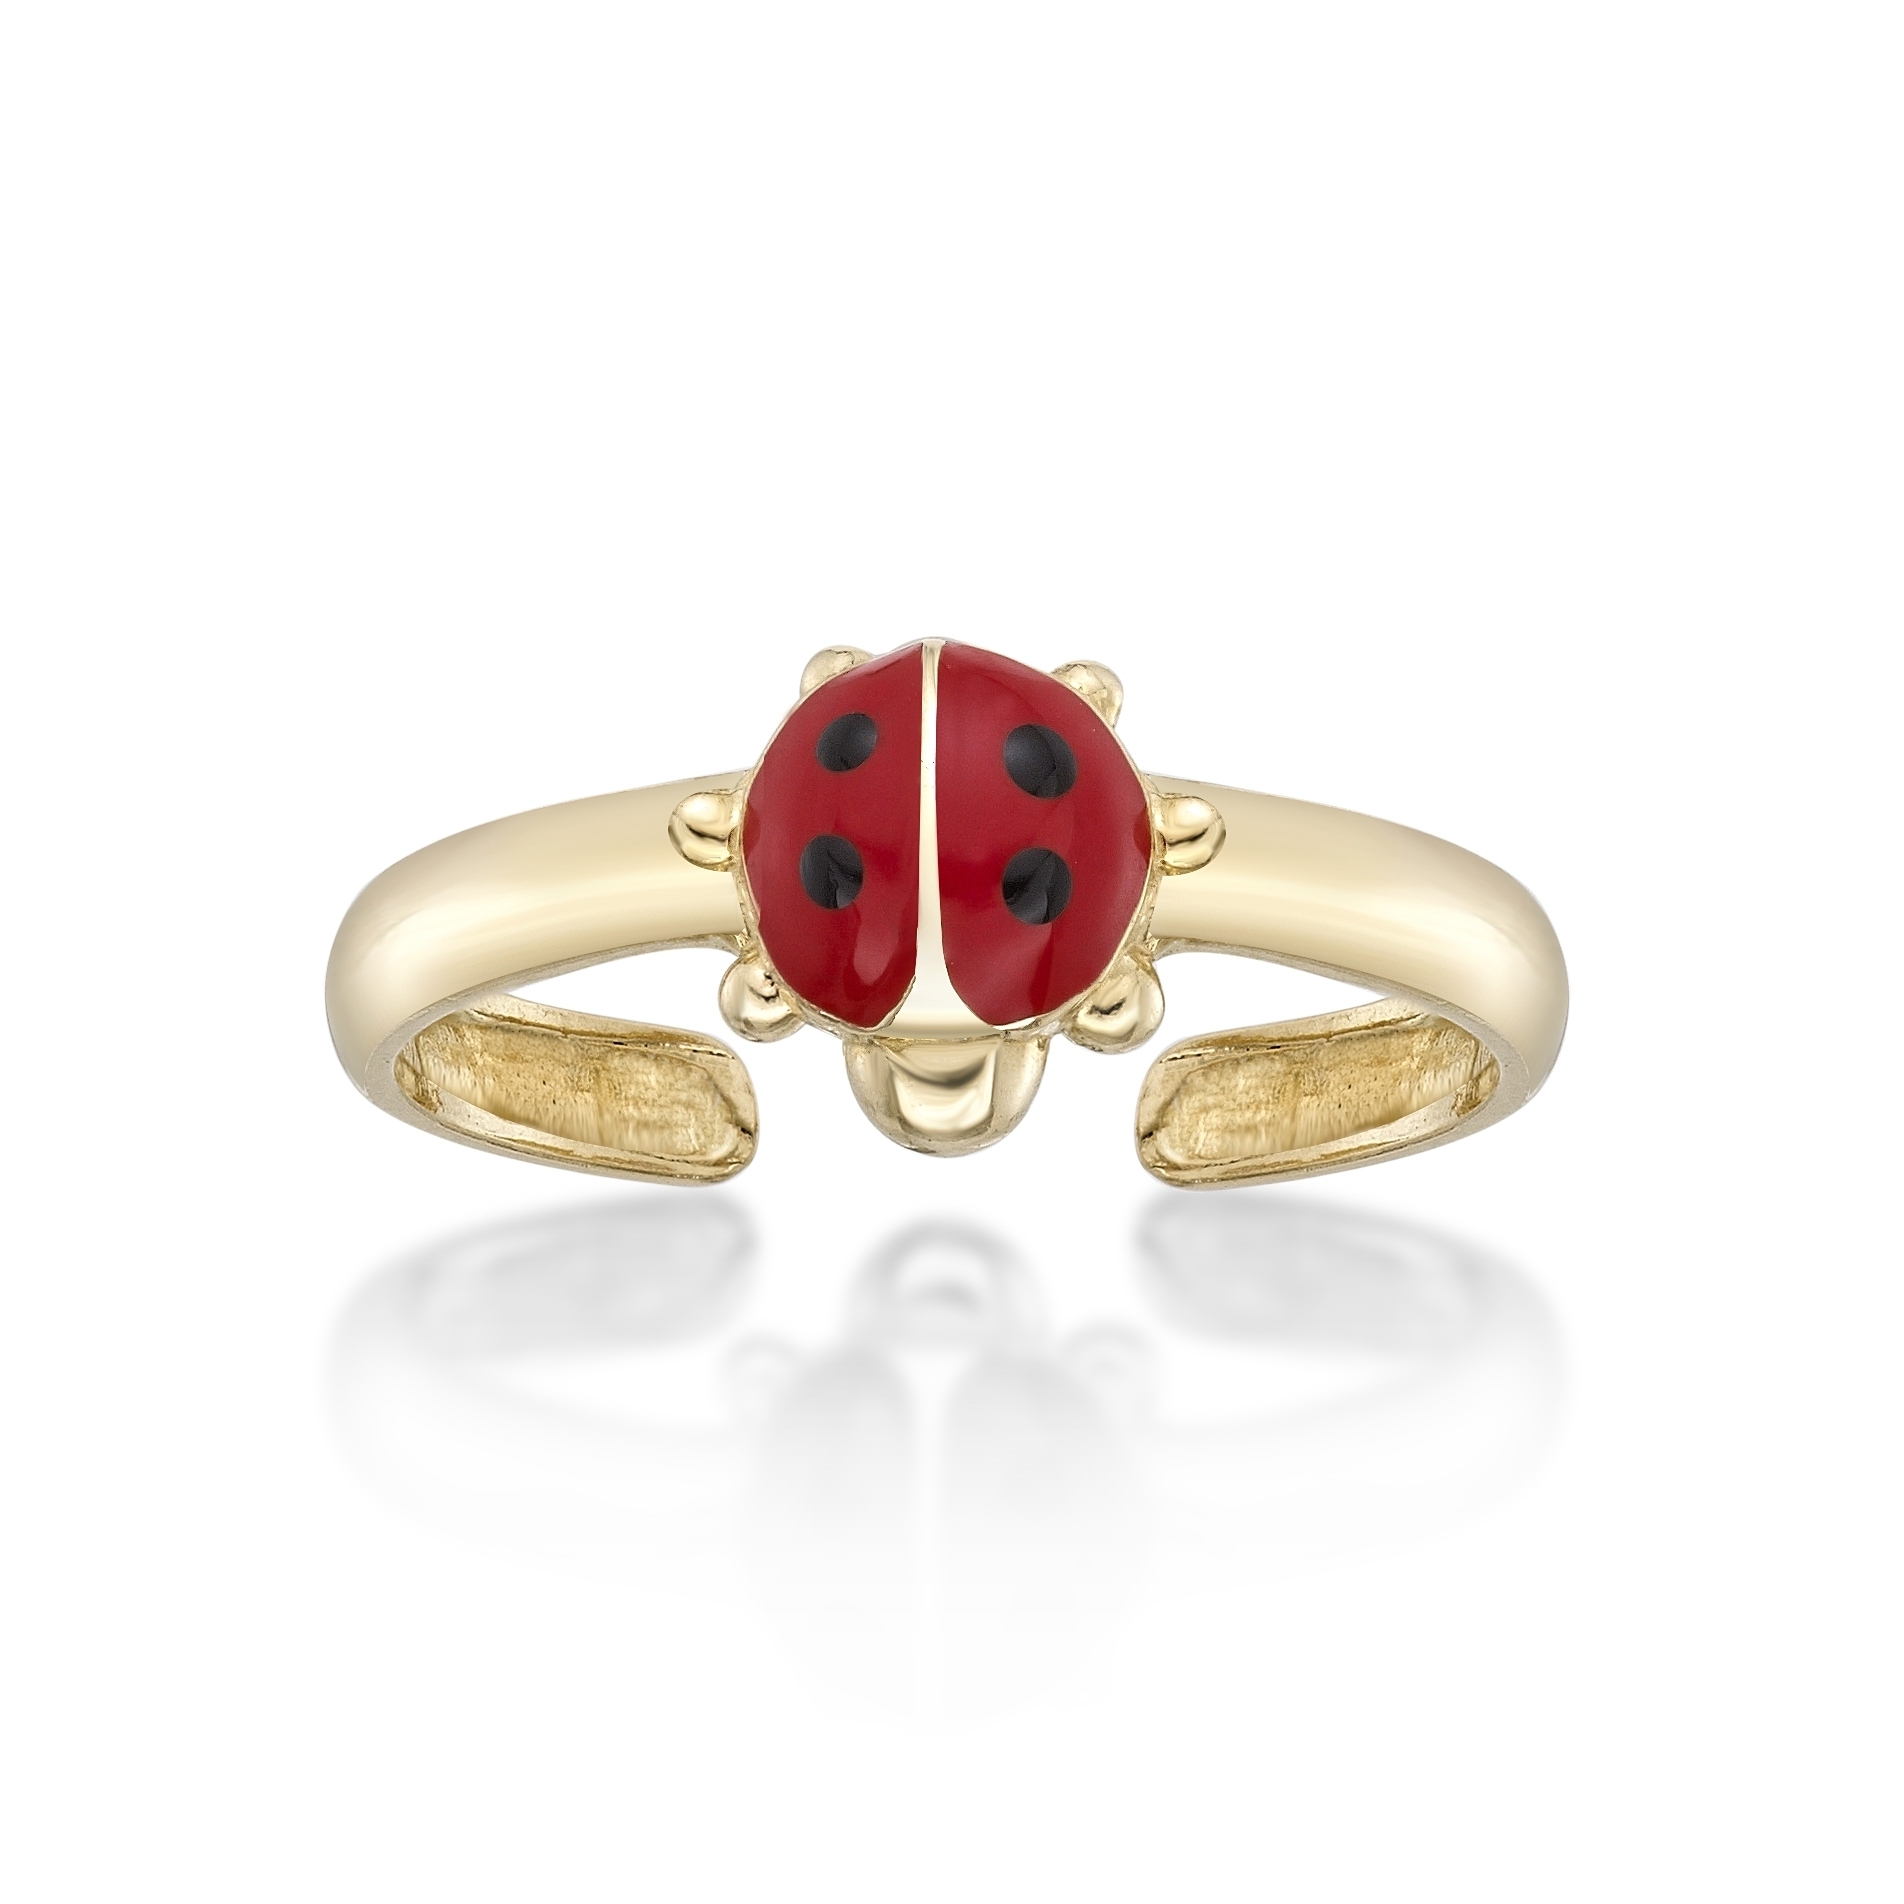 Very Pleased With My Ladybug Toe Ring!